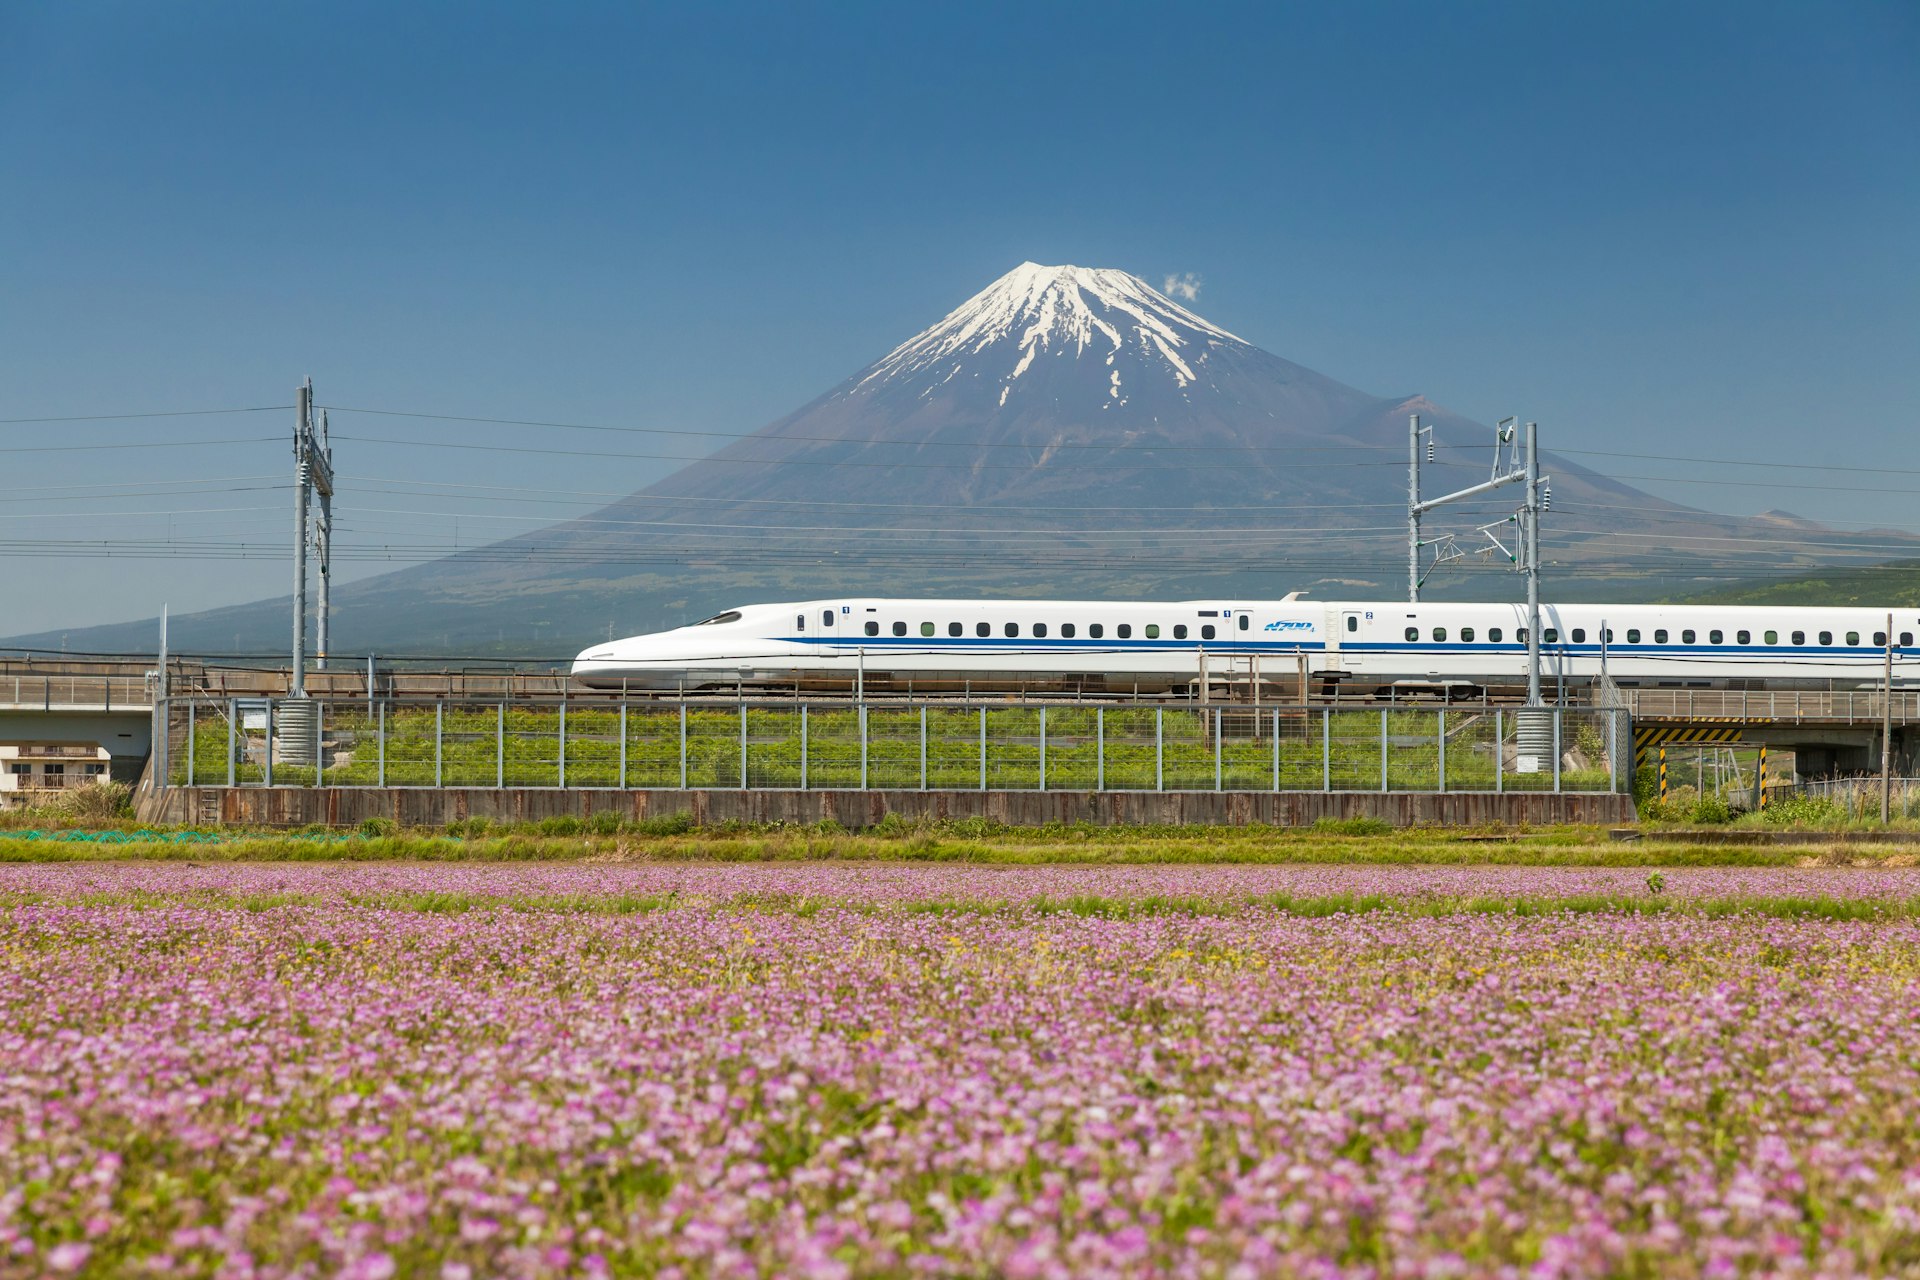 A bullet train passes by a field of pink flowers in bloom at the foot of a mountain 